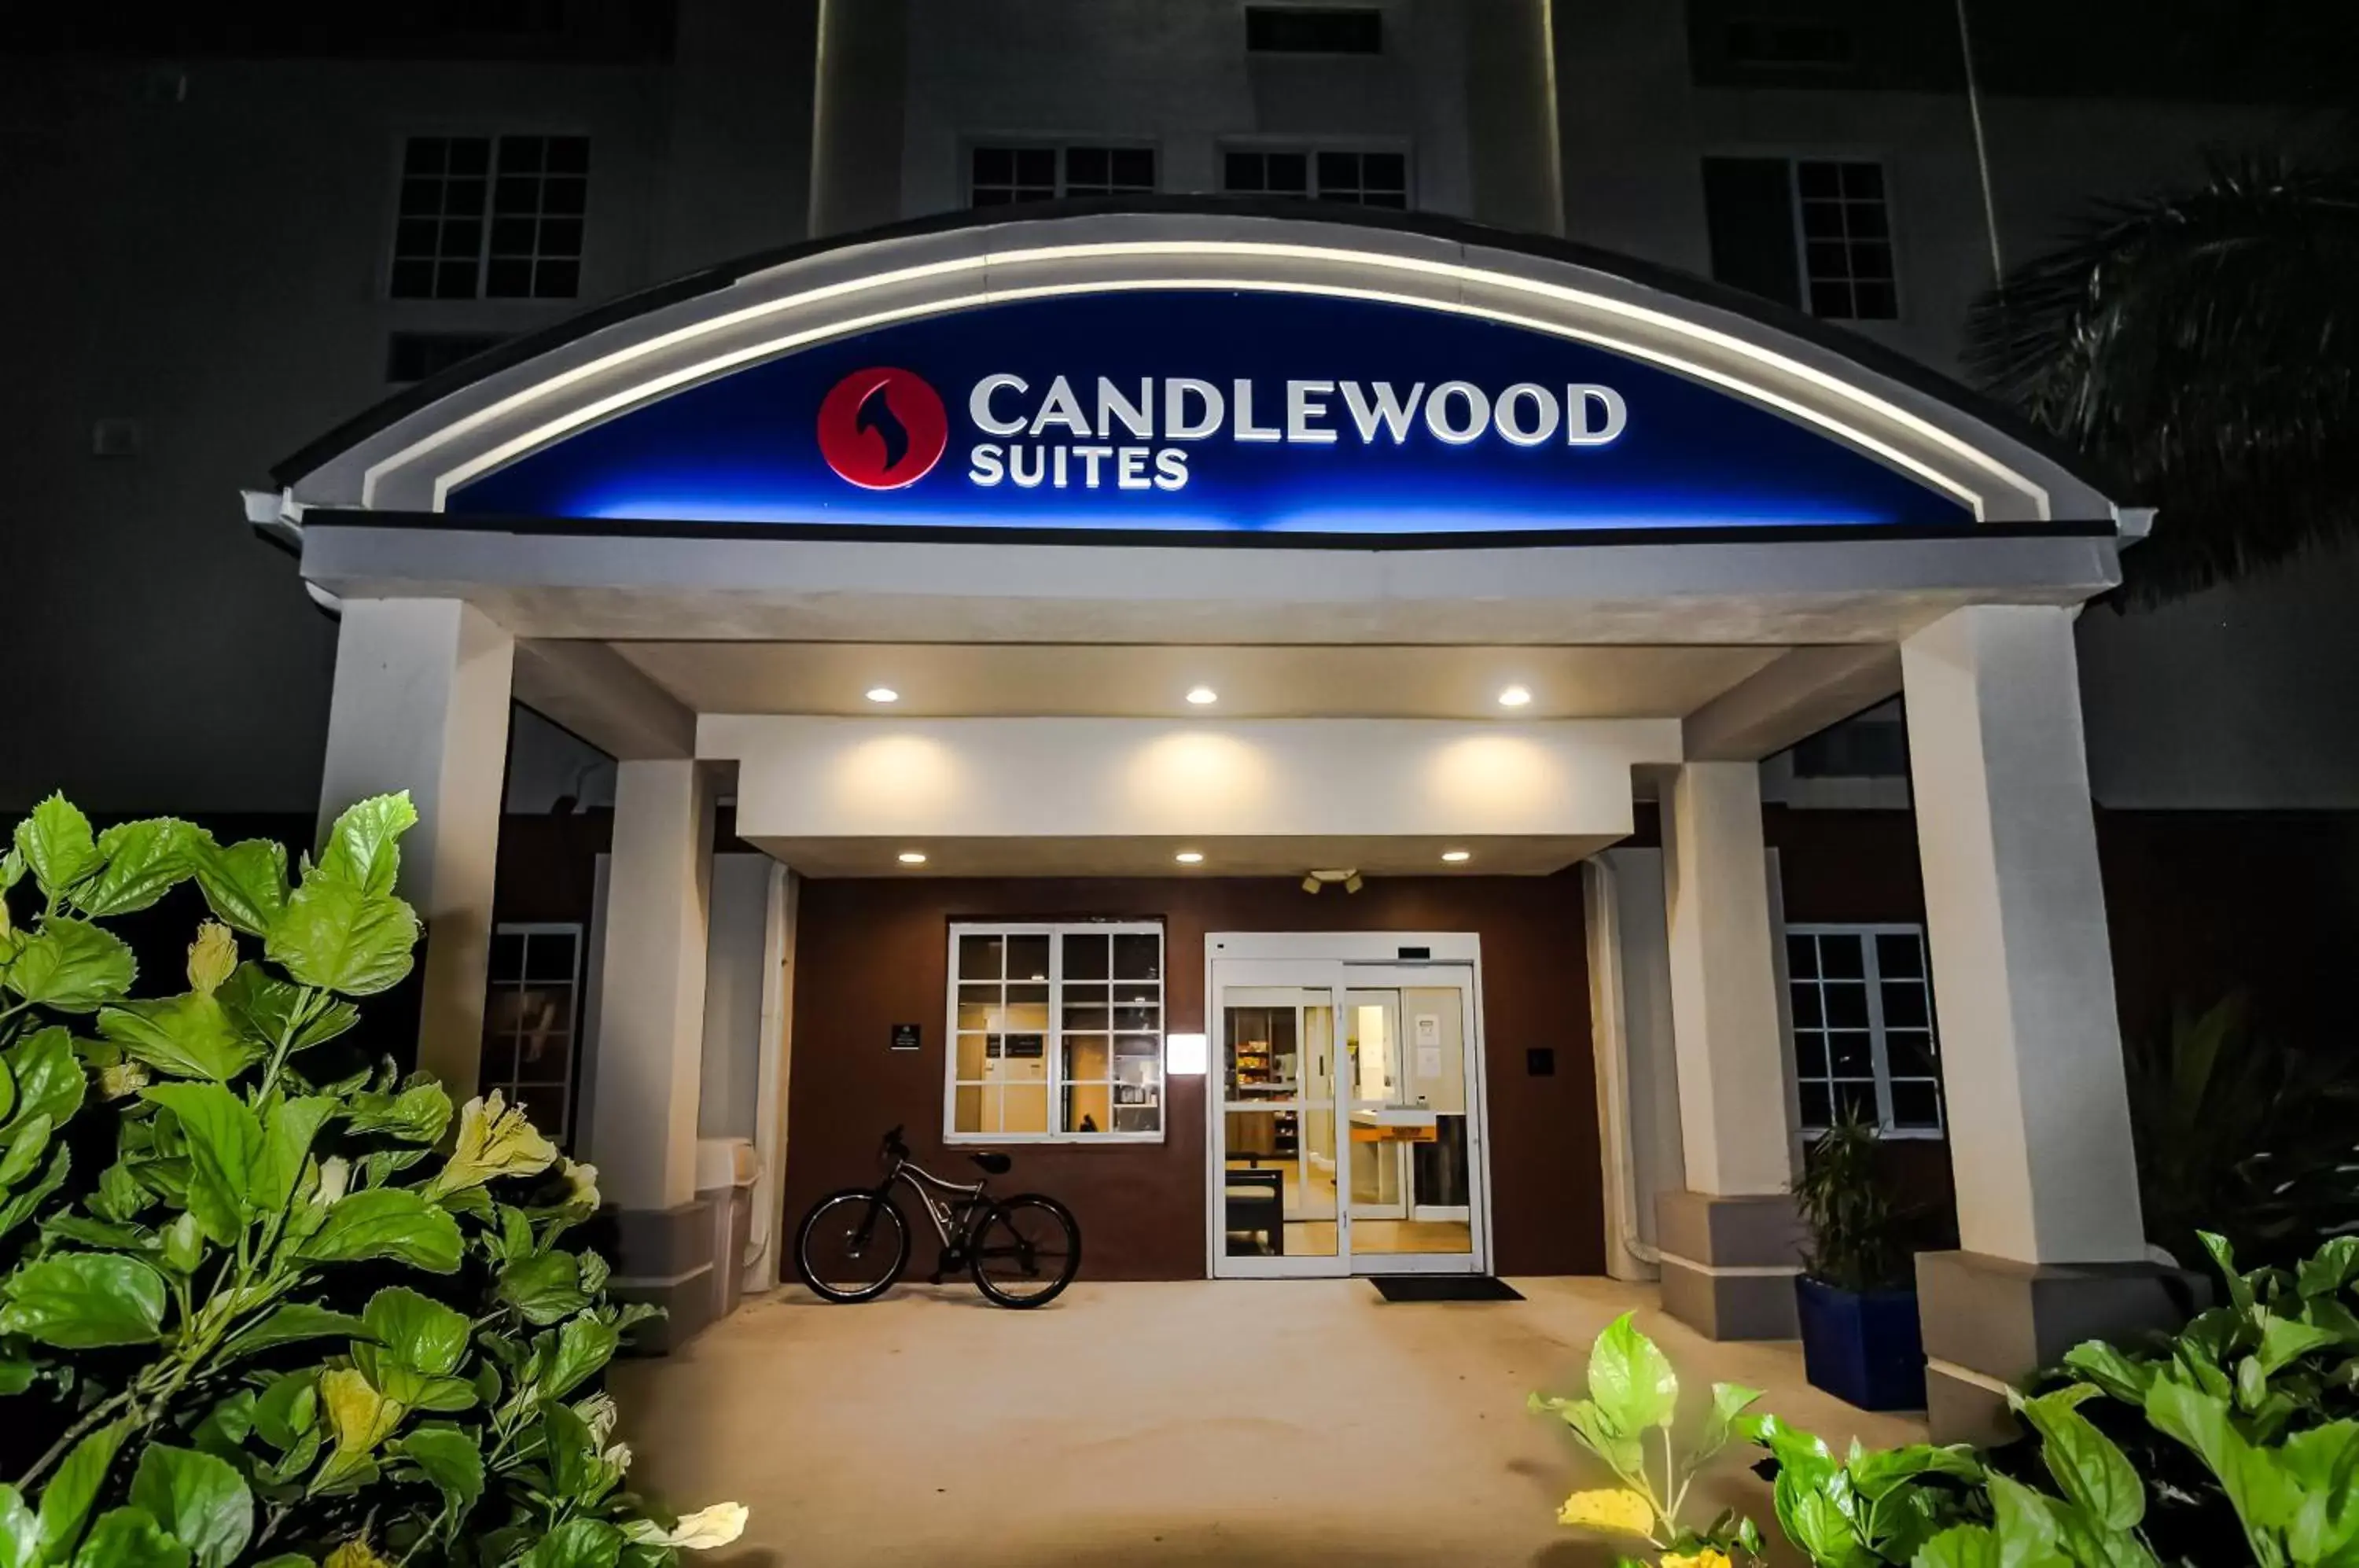 Property building in Candlewood Suites Melbourne-Viera, an IHG Hotel